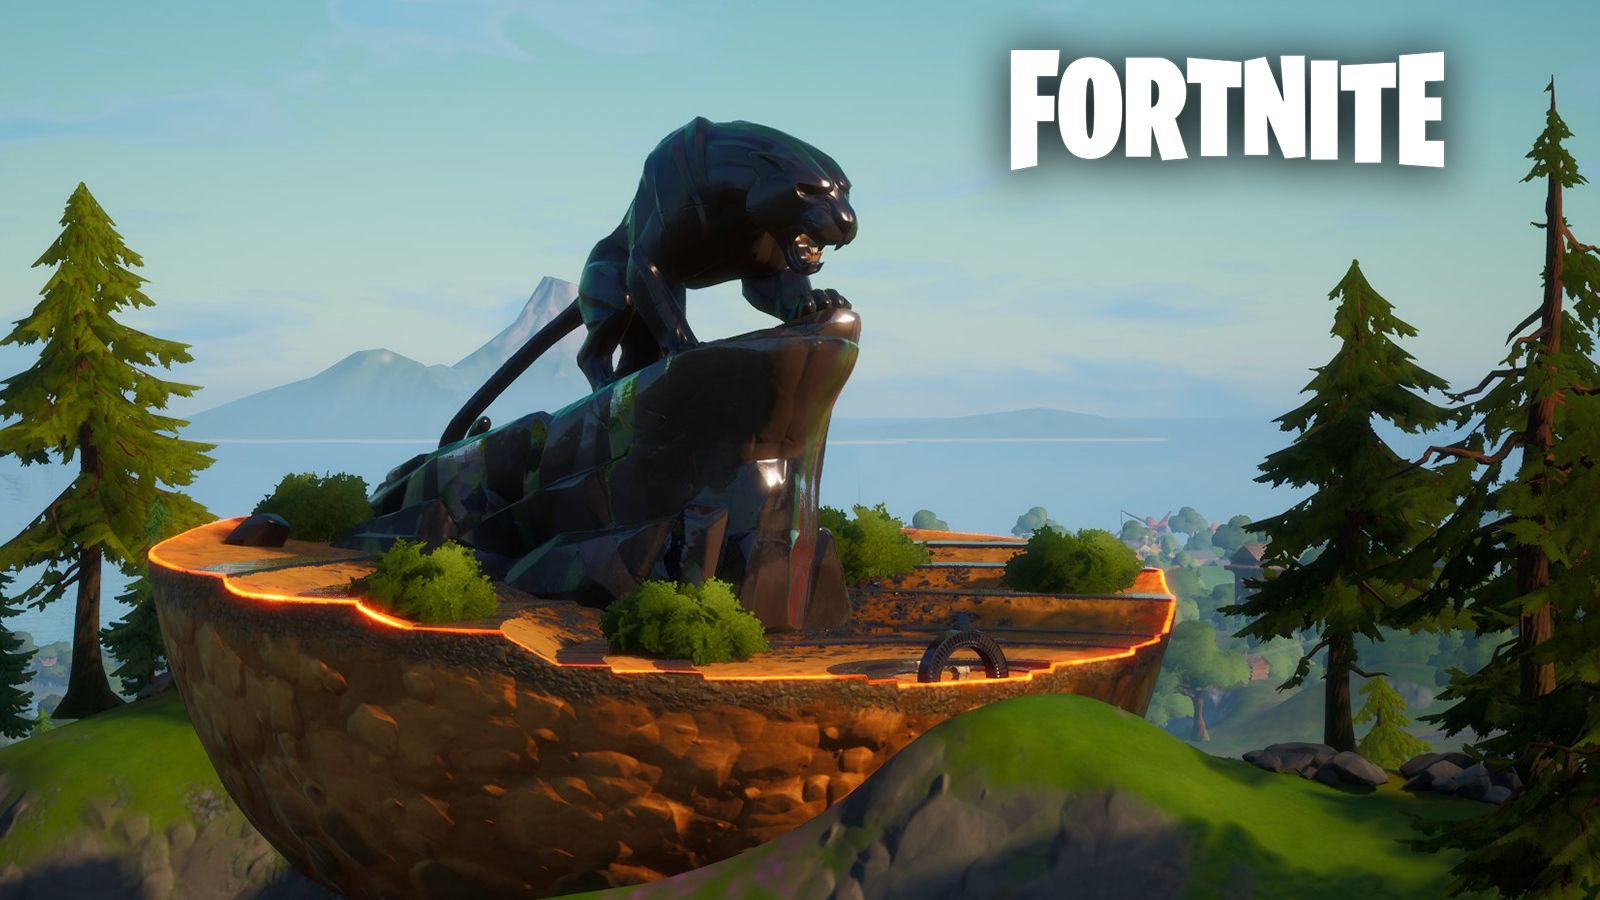 Black Panther's Prowl monument added in Fortnite September 1 map changes